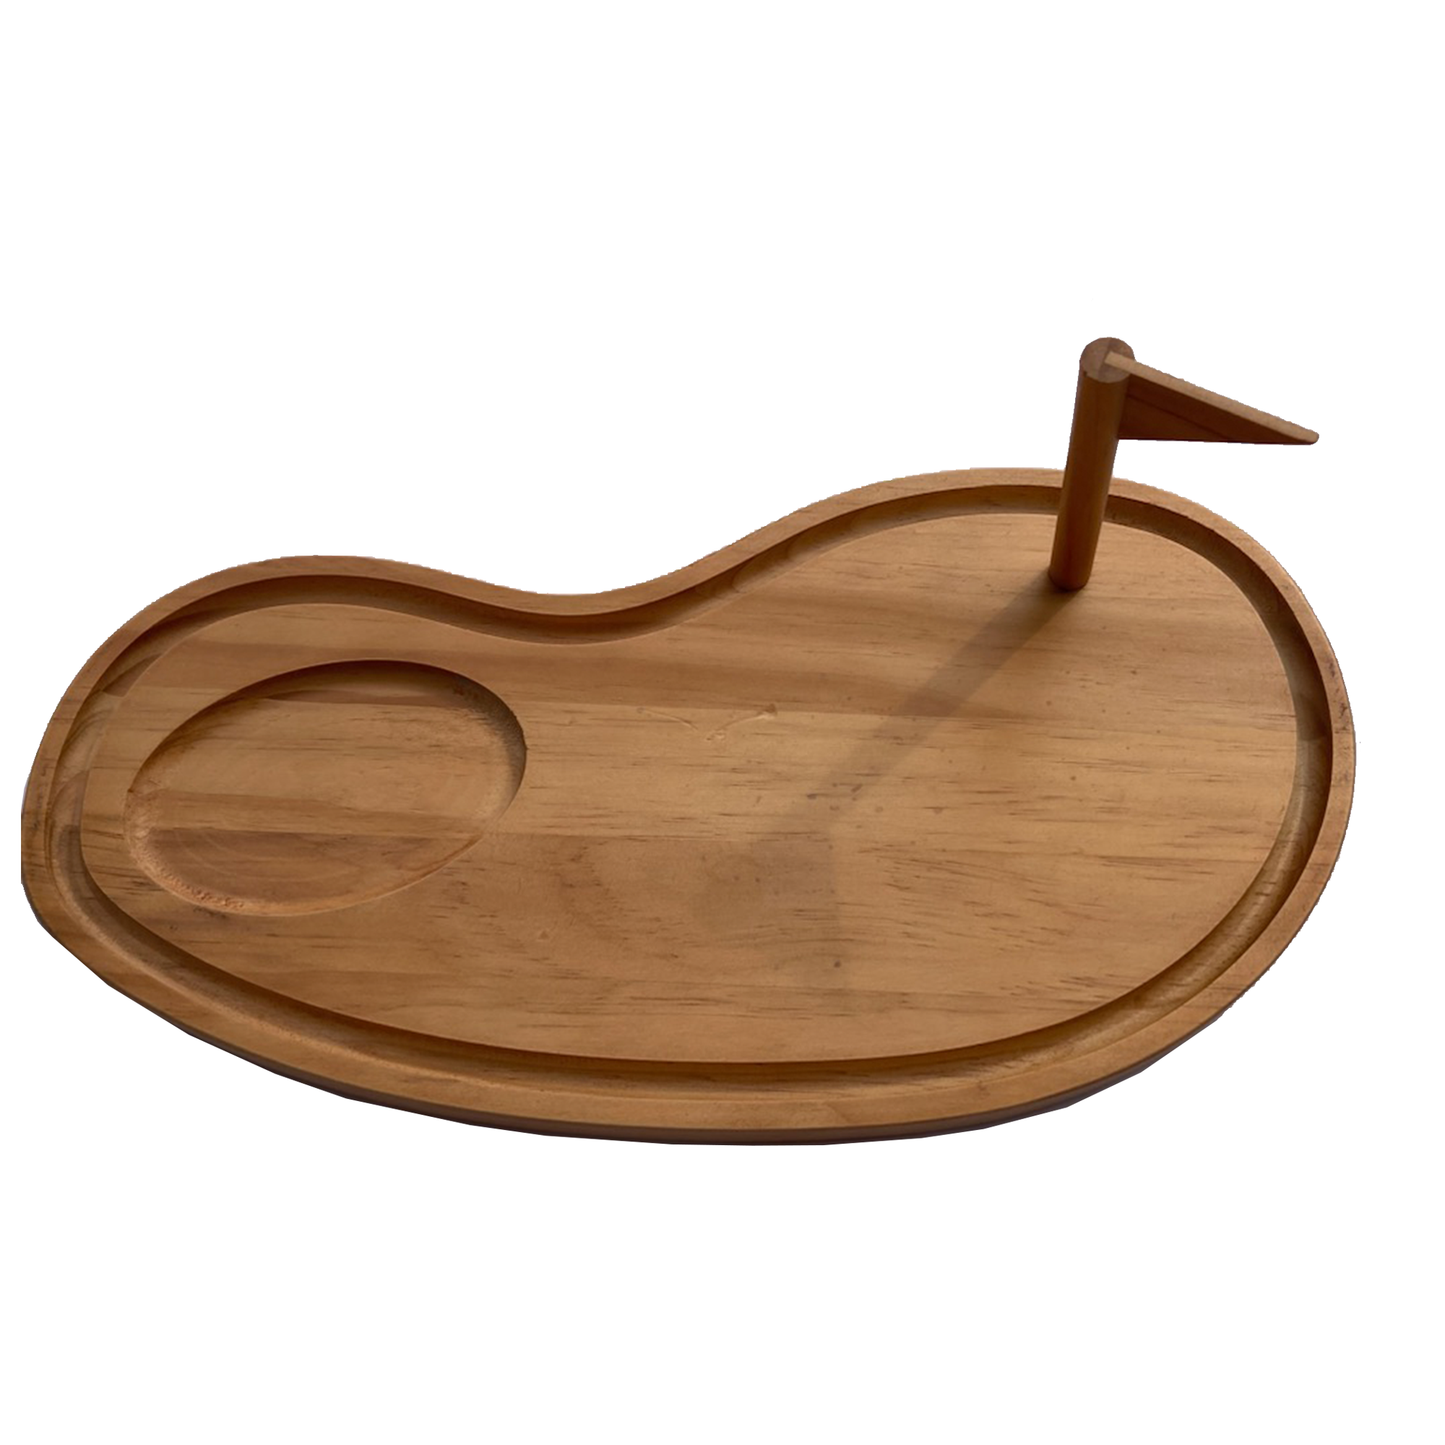 GOLF COURSE WOOD CHEESE BOARD